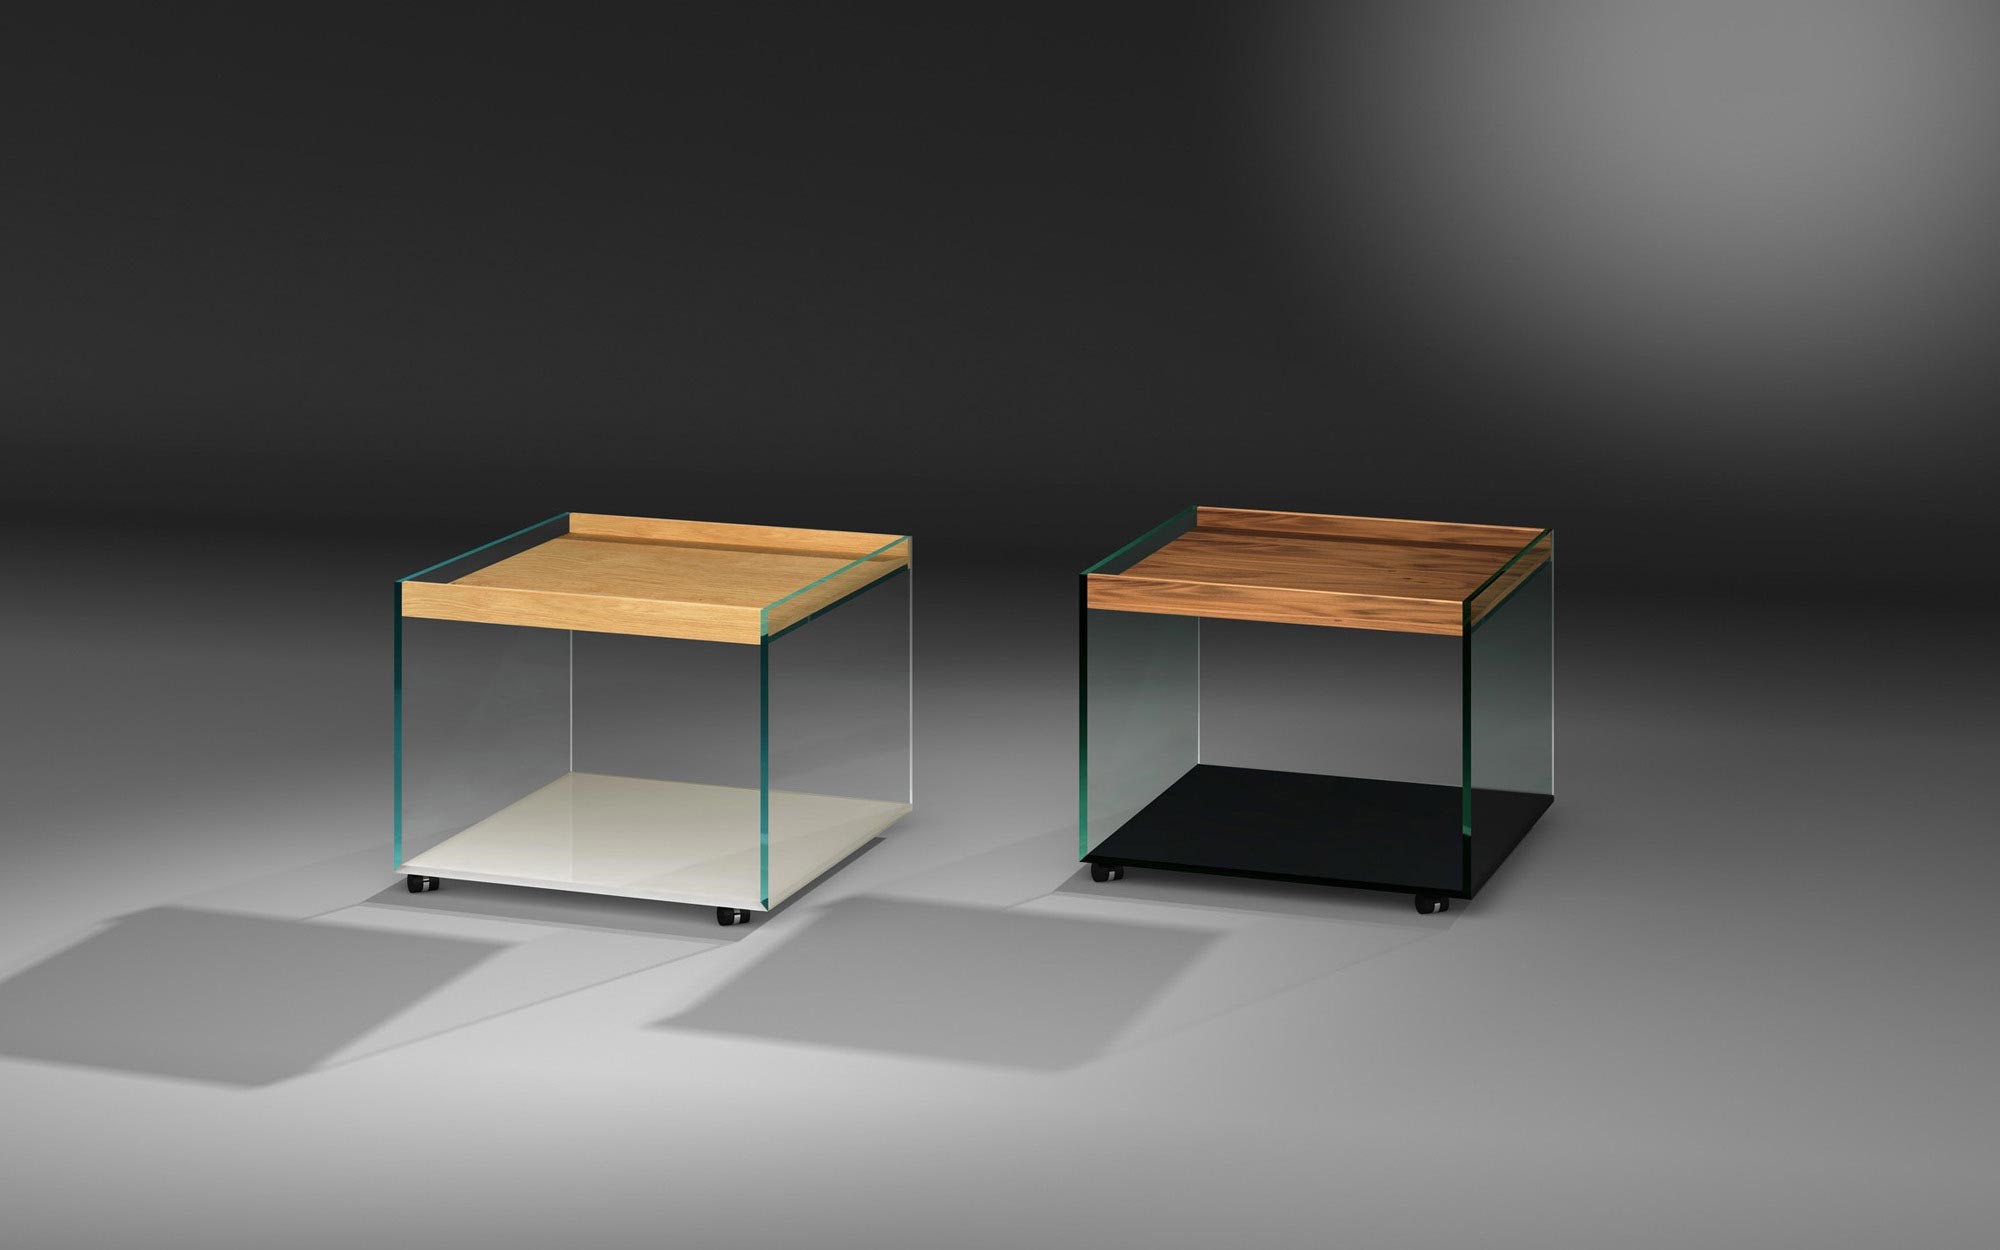 Glass side table with TRAY: 60 OPTWHITE partial pearl white - tray OAK + 60 FLOATGLASS partial jet black - tray WALNUT